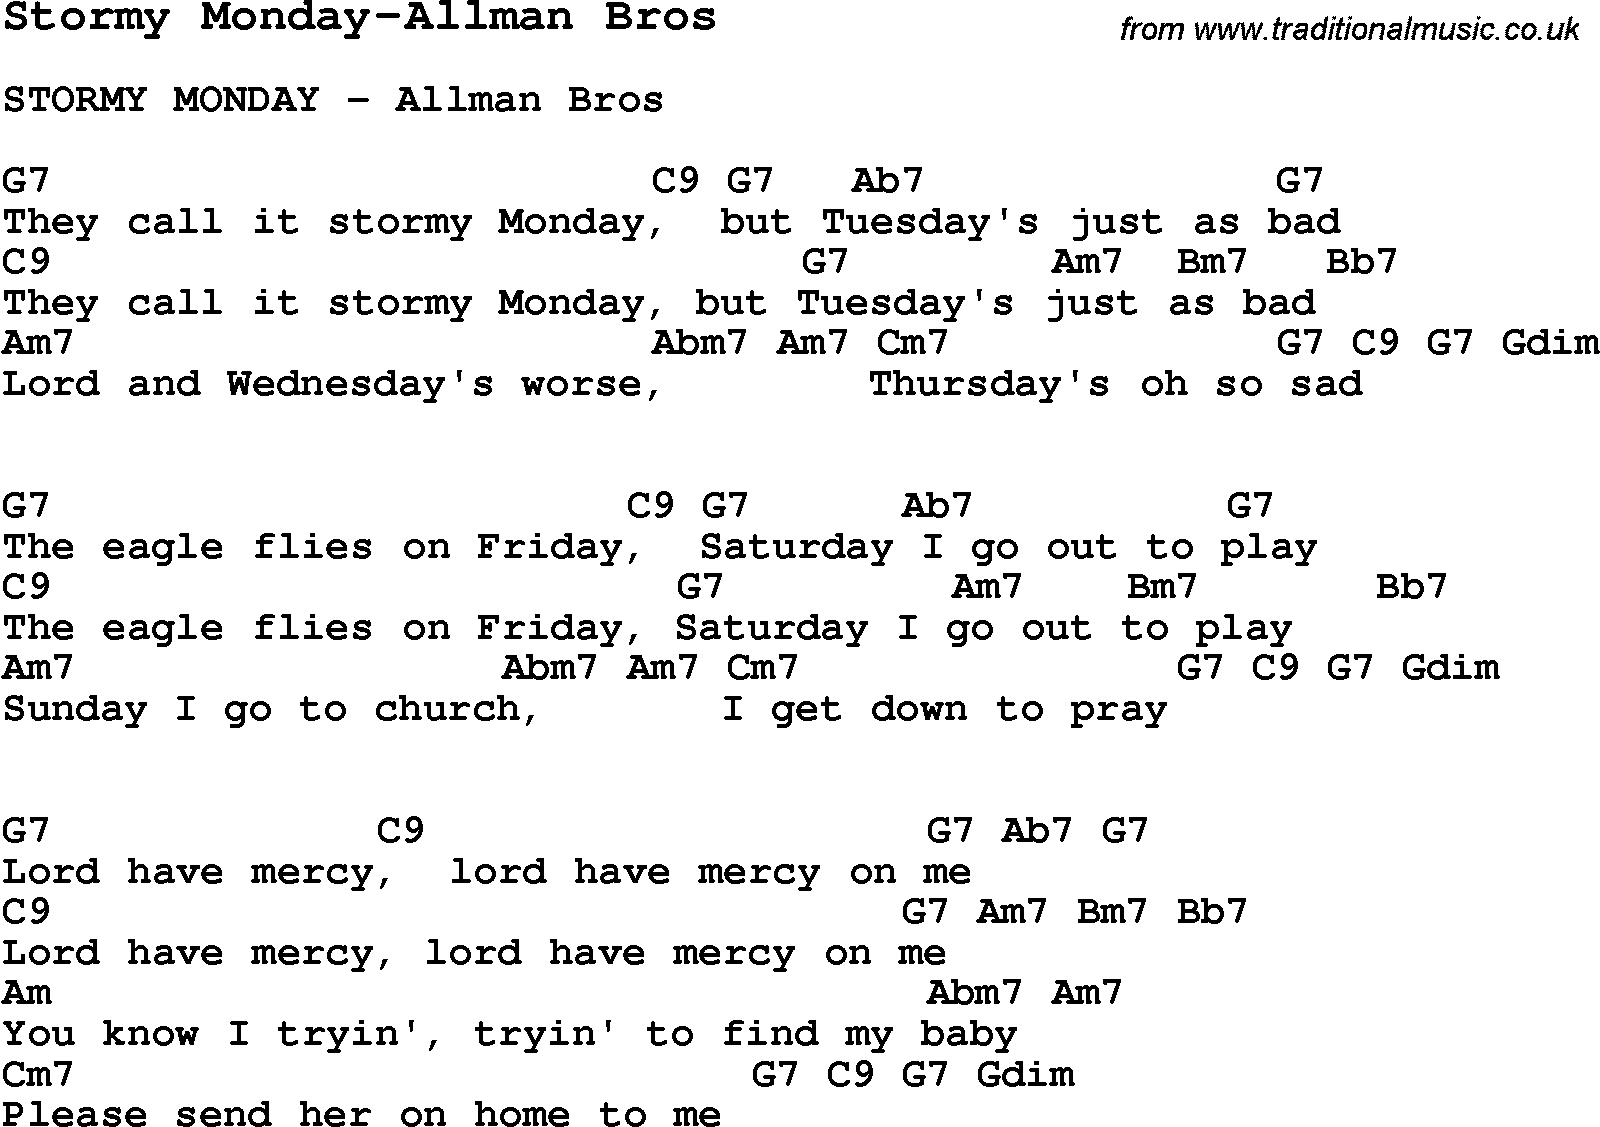 Blues Guitar Song, lyrics, chords, tablature, playing hints for Stormy Monday-Allman Bros